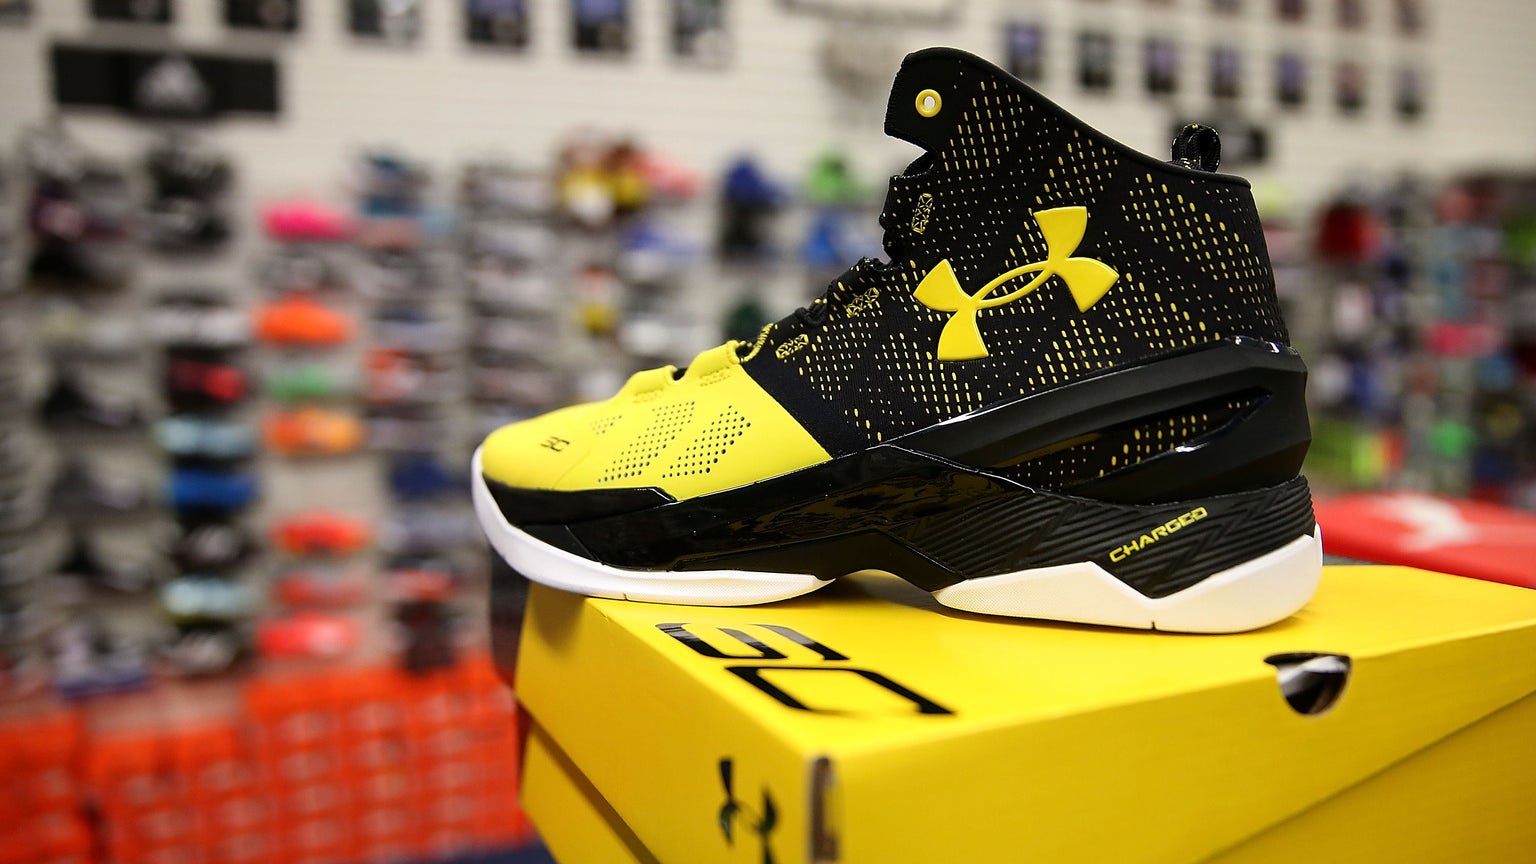 Steph Curry To Sign lifetime deal with Under Armour